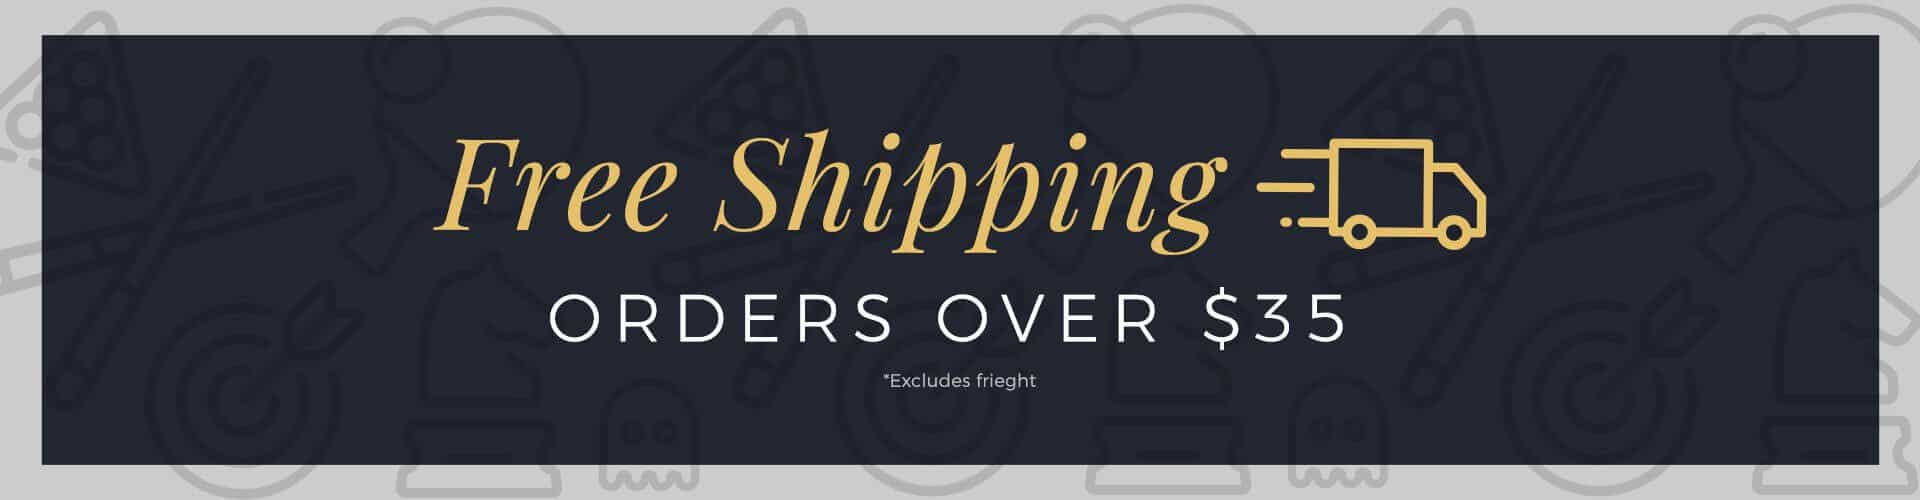 GS_FreeShipping_Banner